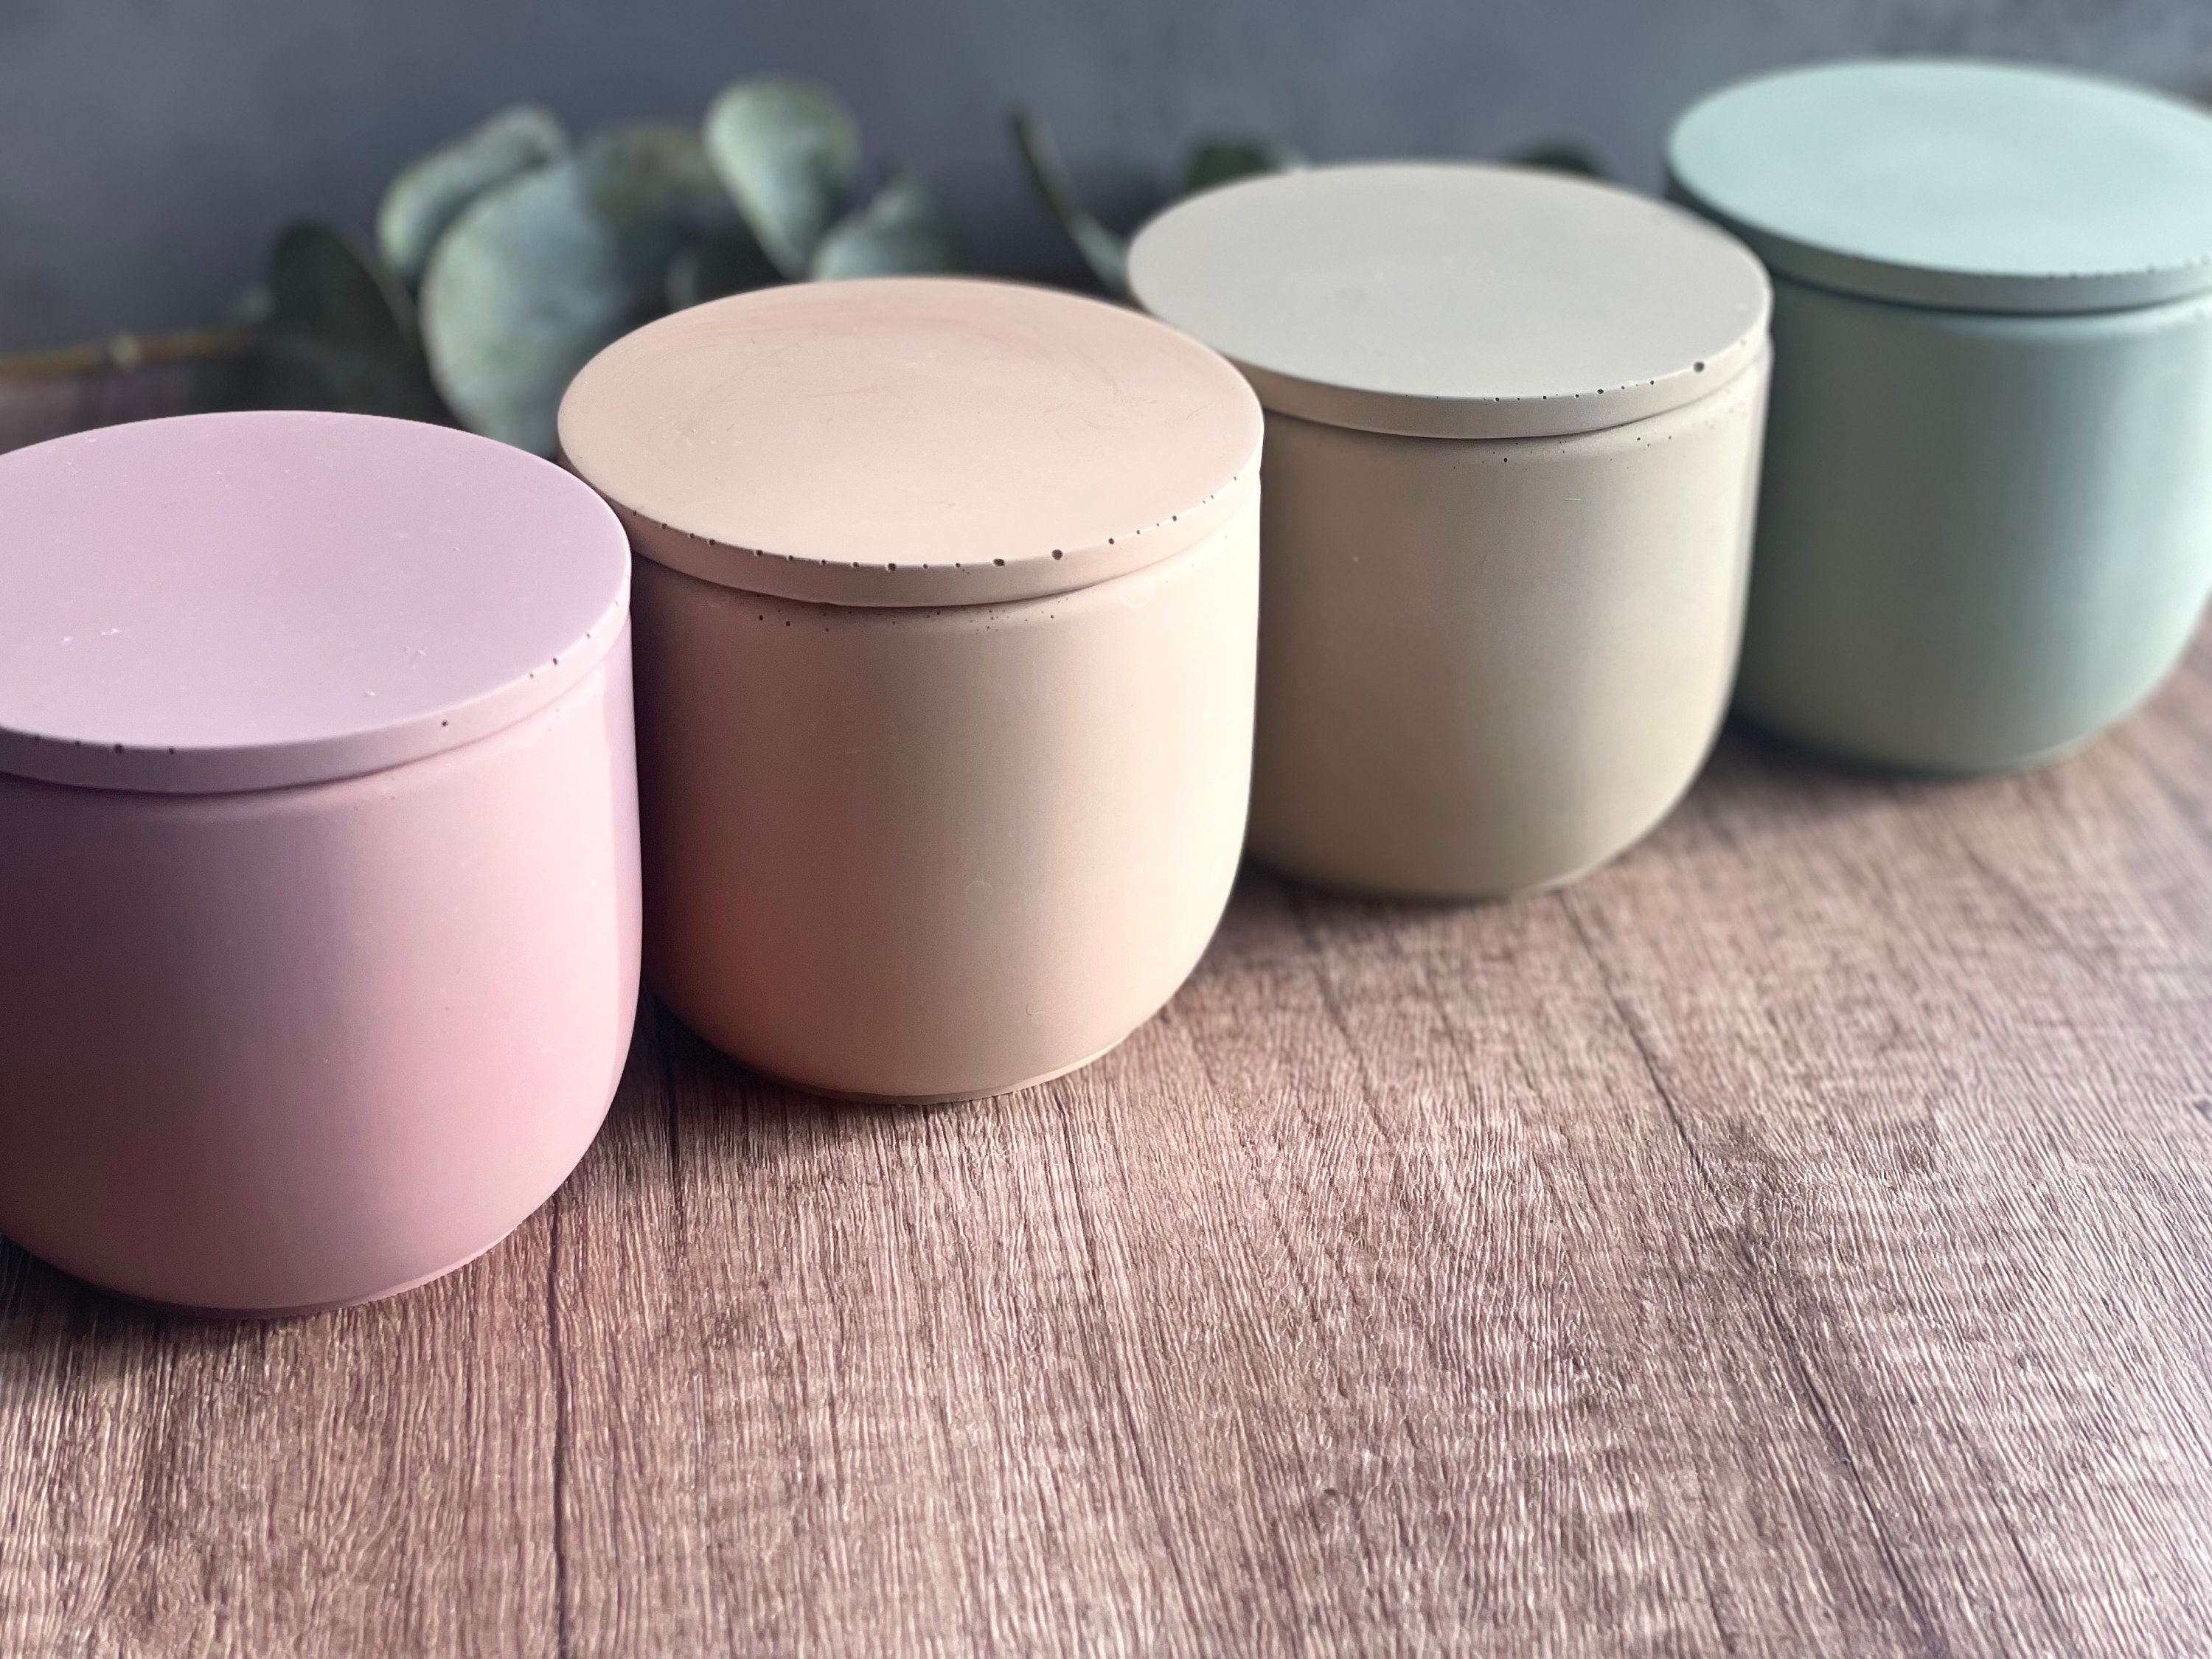 3 in 1 ceramic candle jar mock-up, different colors